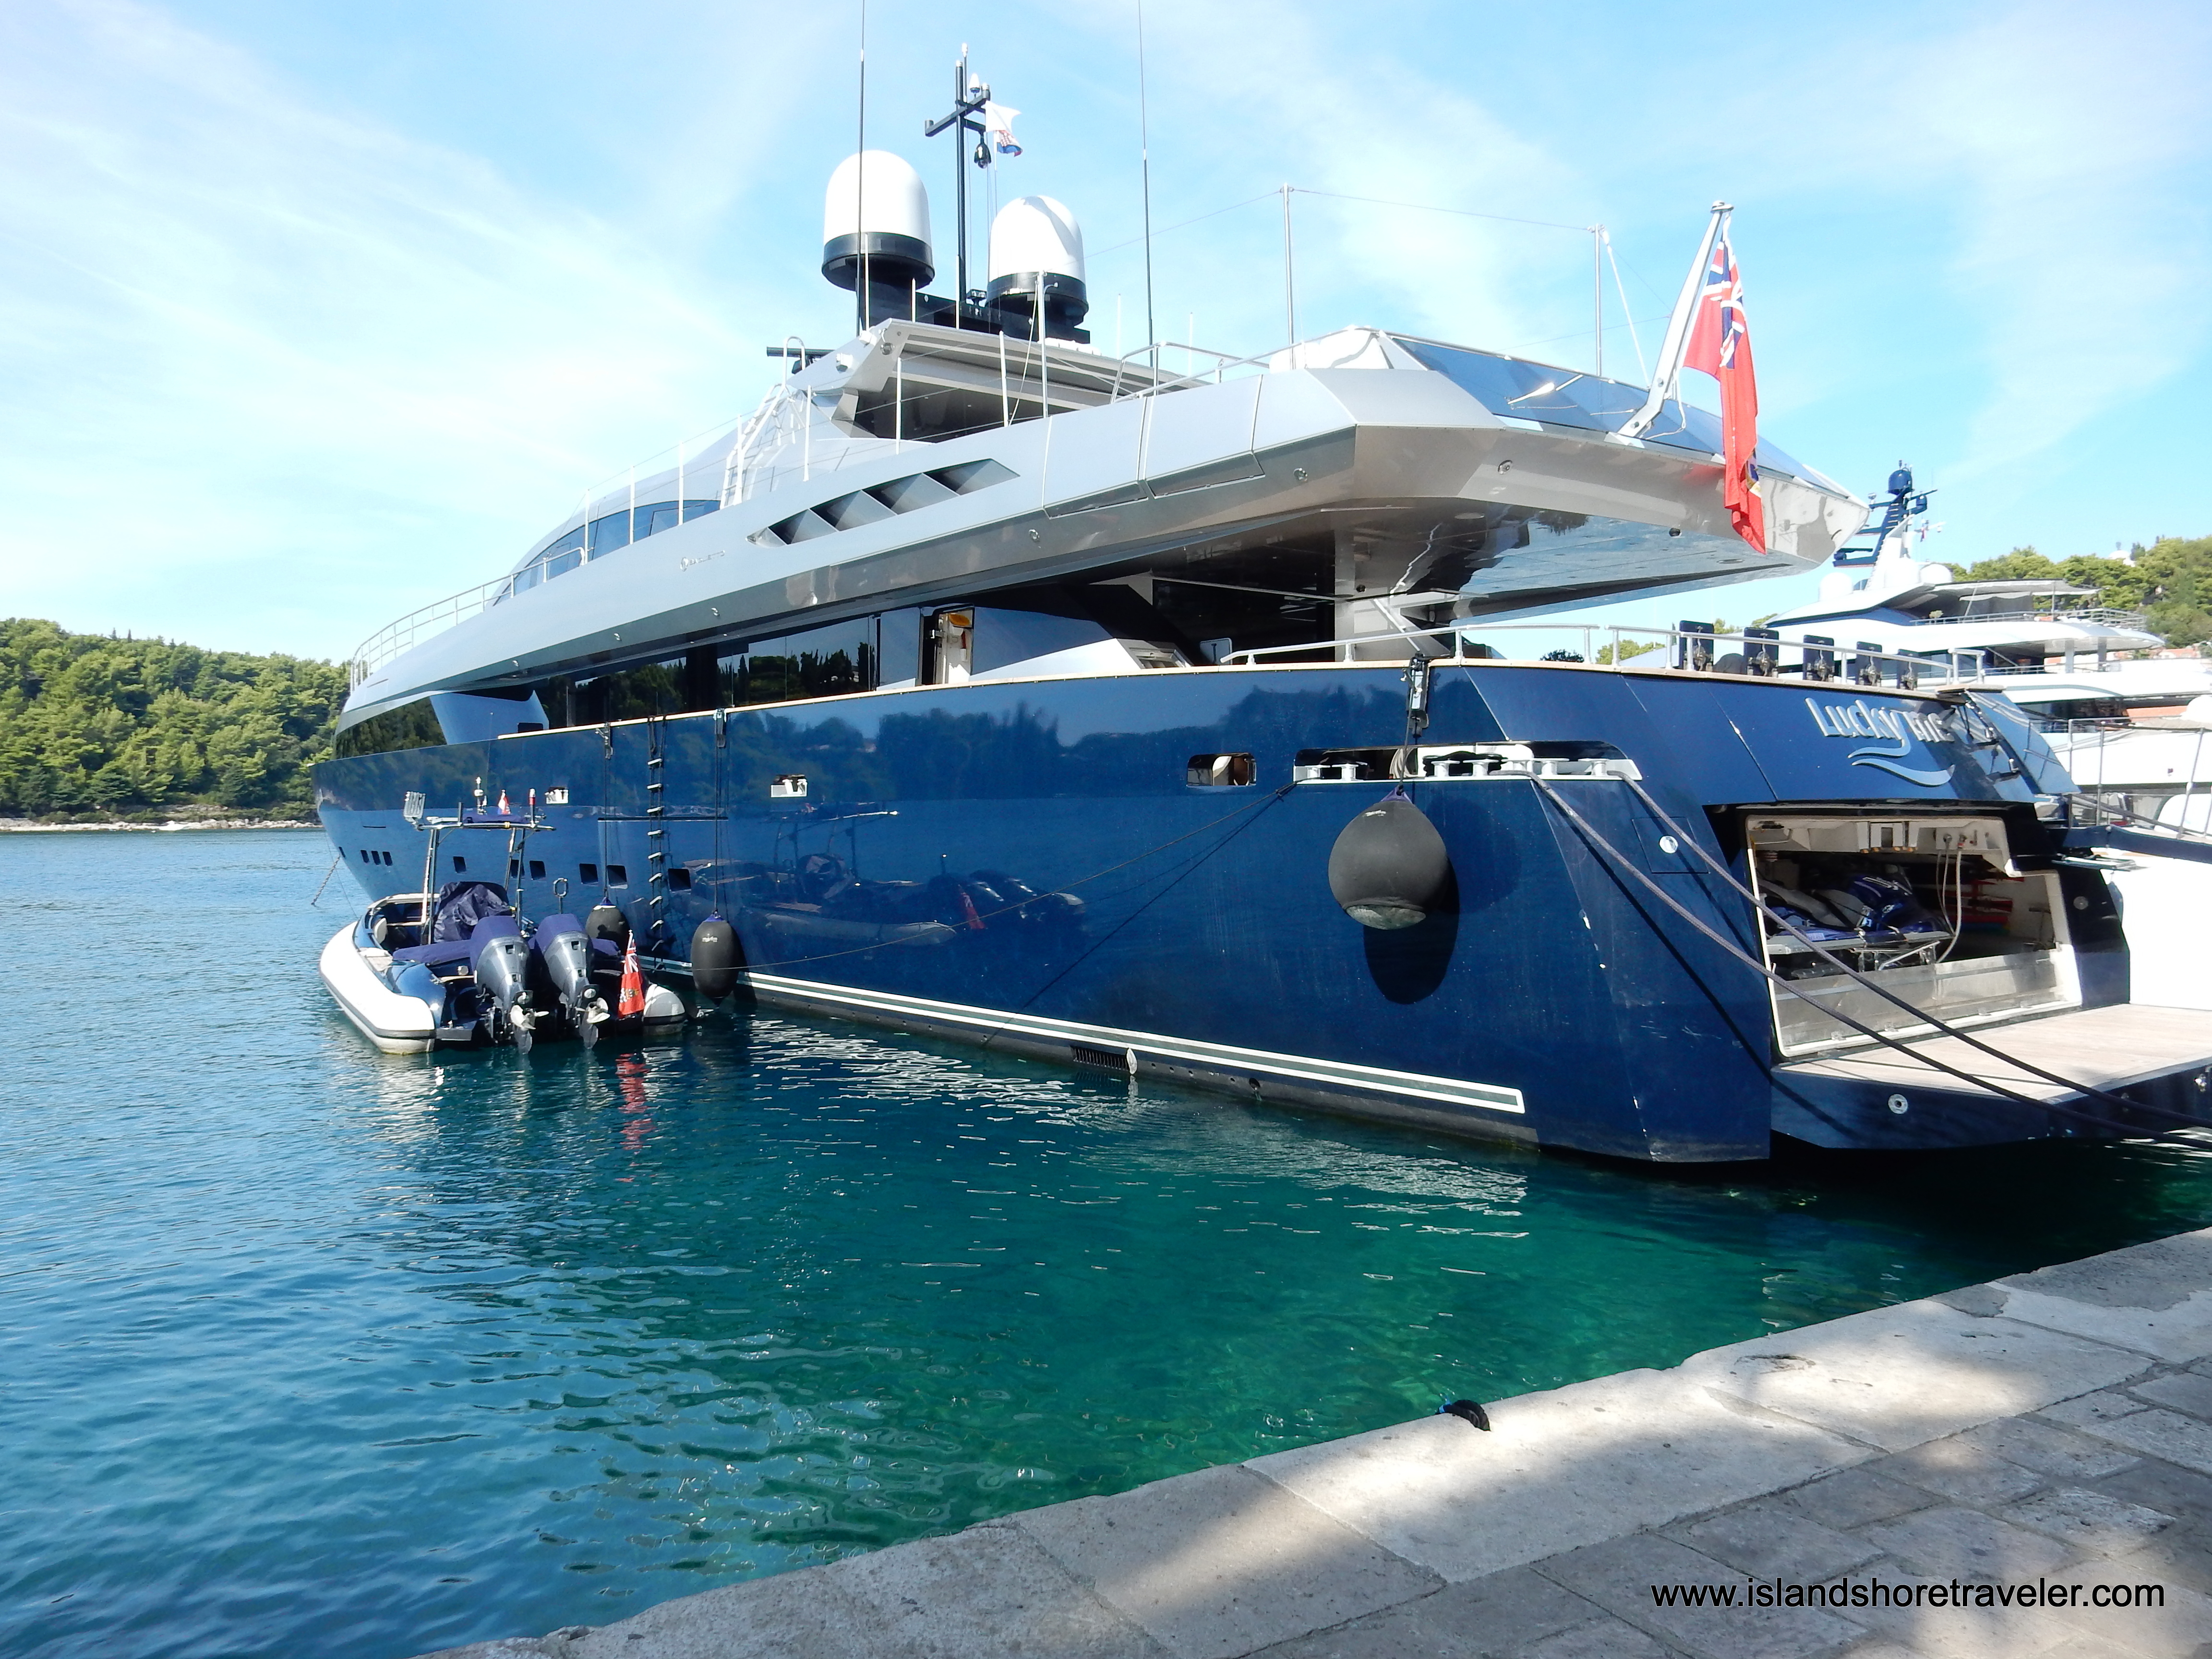 "Lucky Me" Yacht Docked in Cavtat